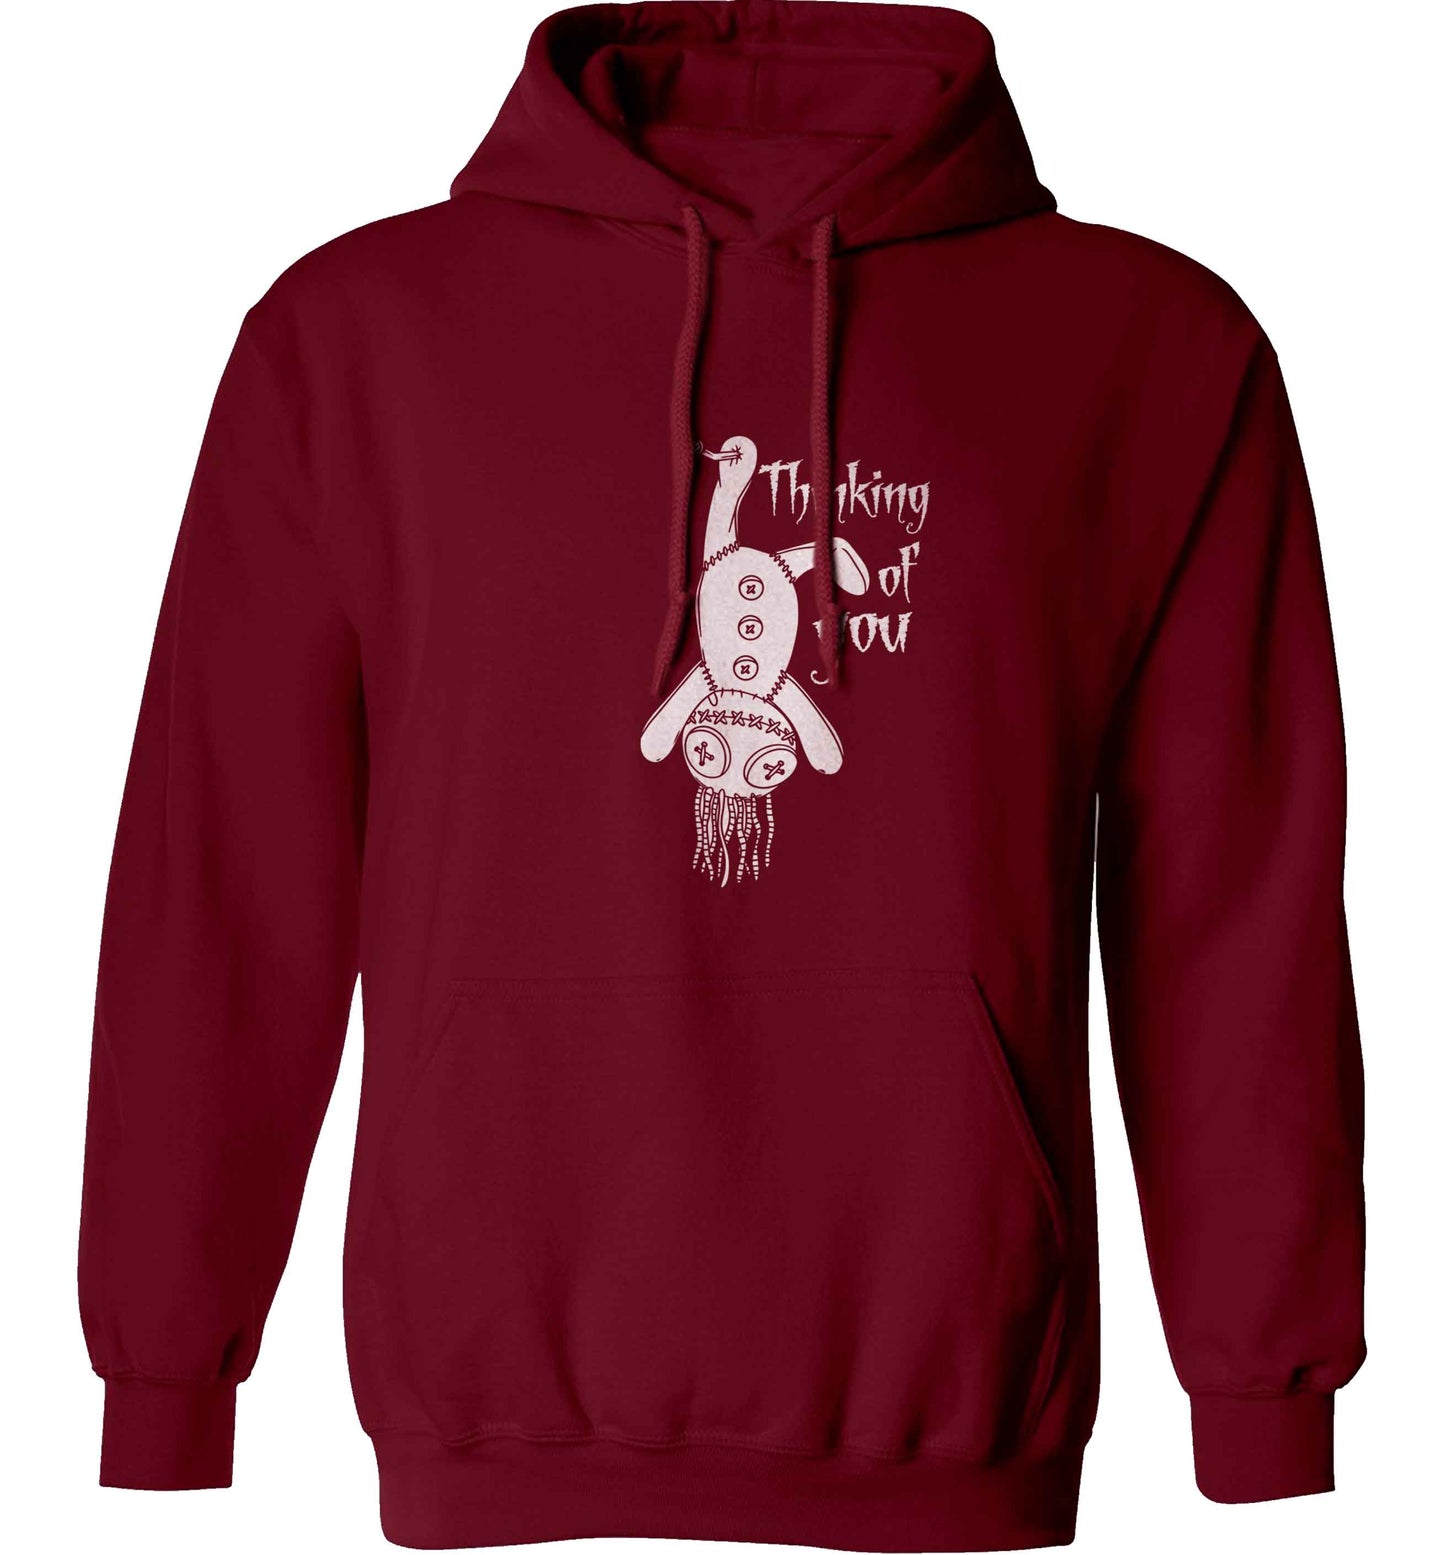 Thinking of you adults unisex maroon hoodie 2XL